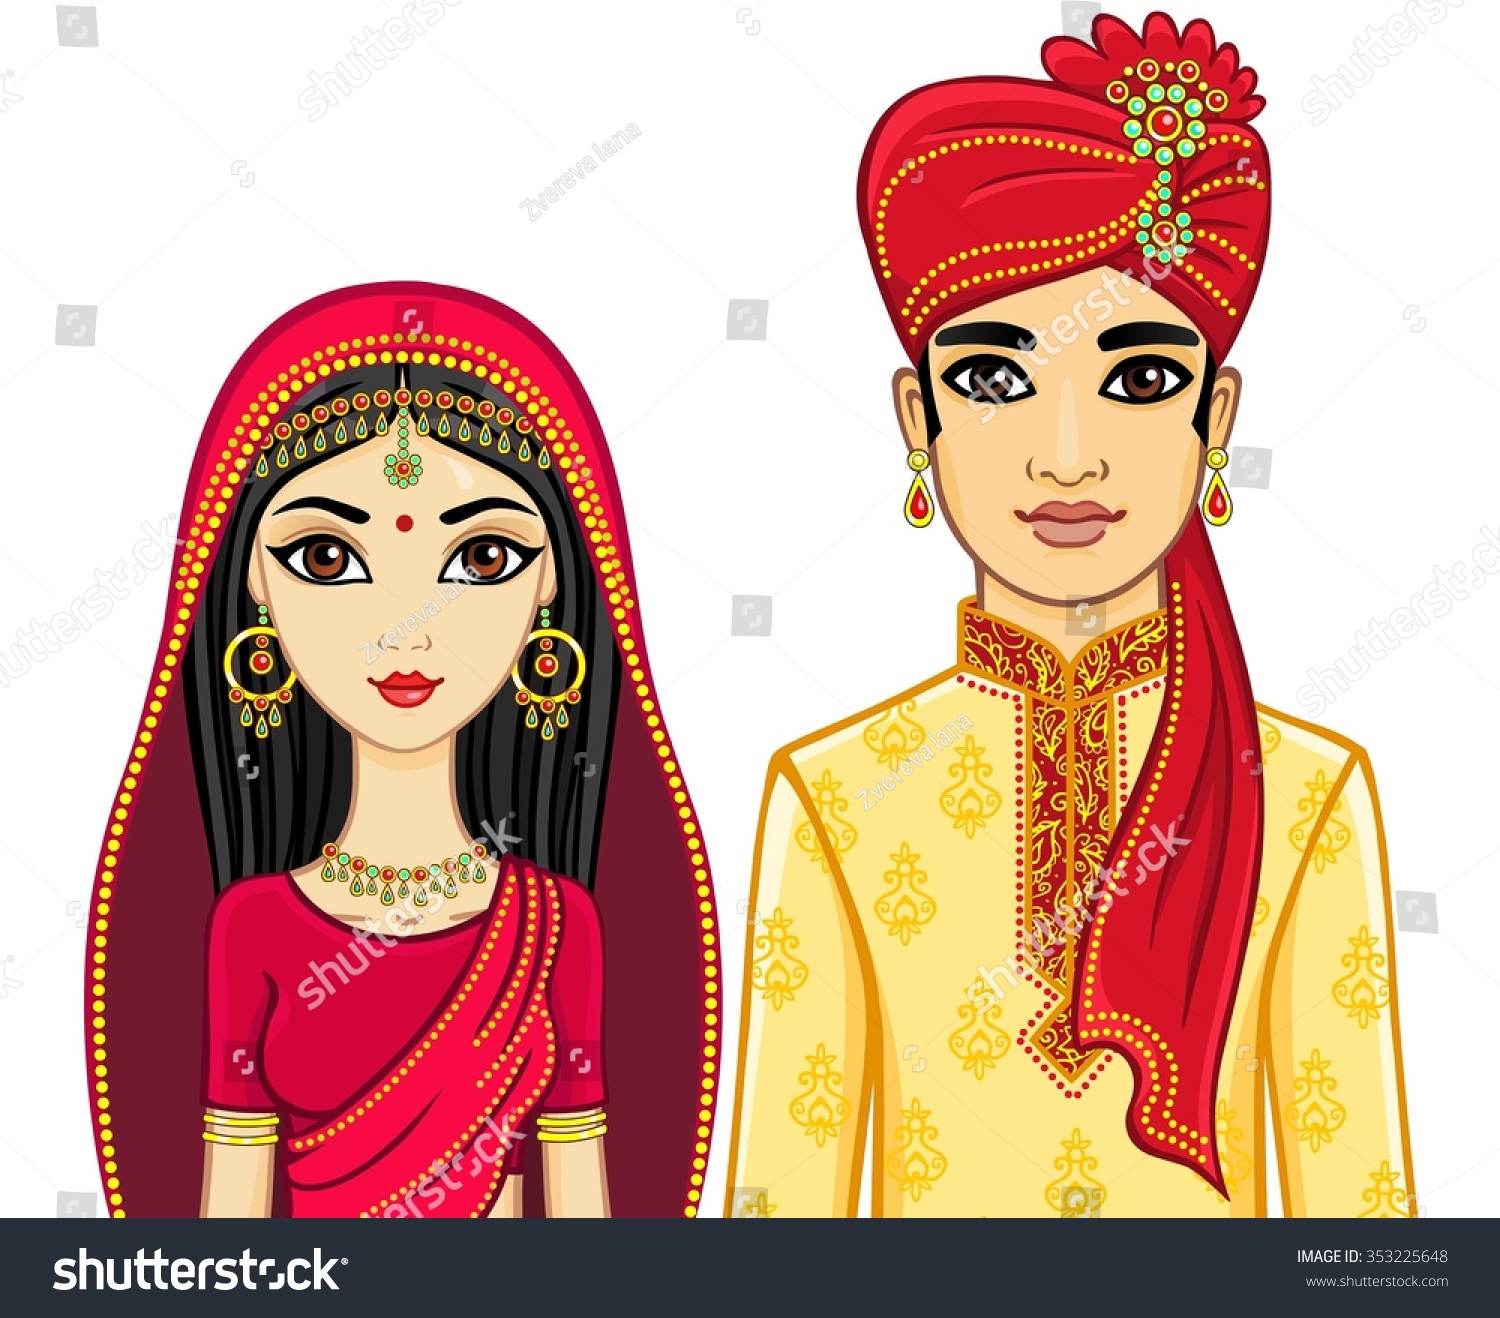 indian family clipart free download - photo #20